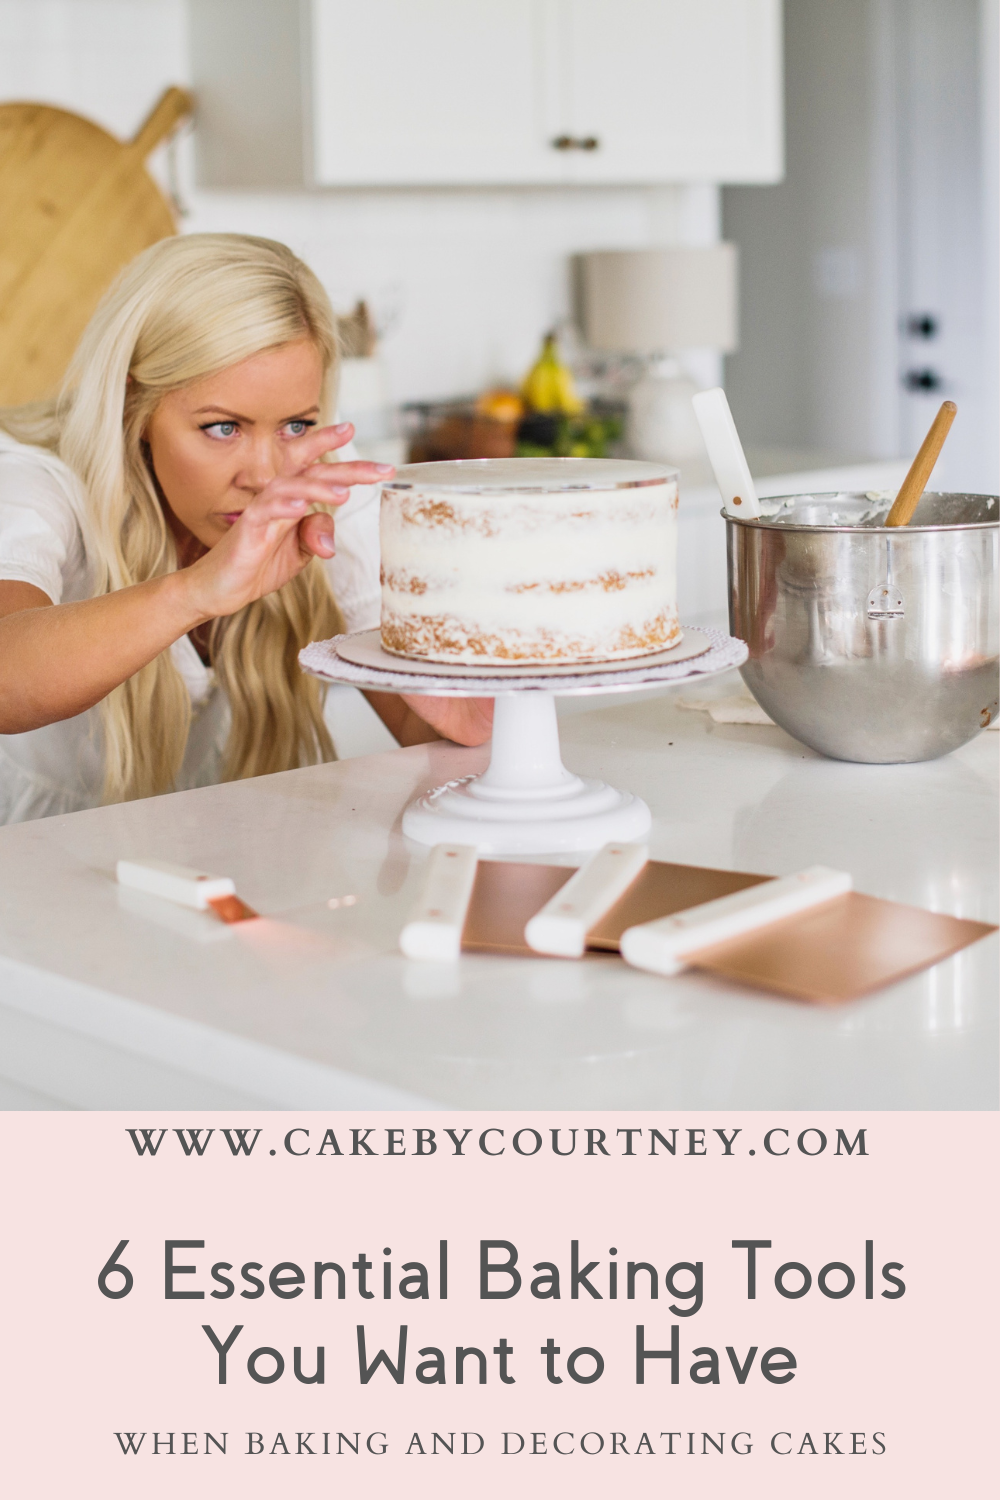 https://cakebycourtney.com/wp-content/uploads/2022/09/essential-cake-baking-tools.png